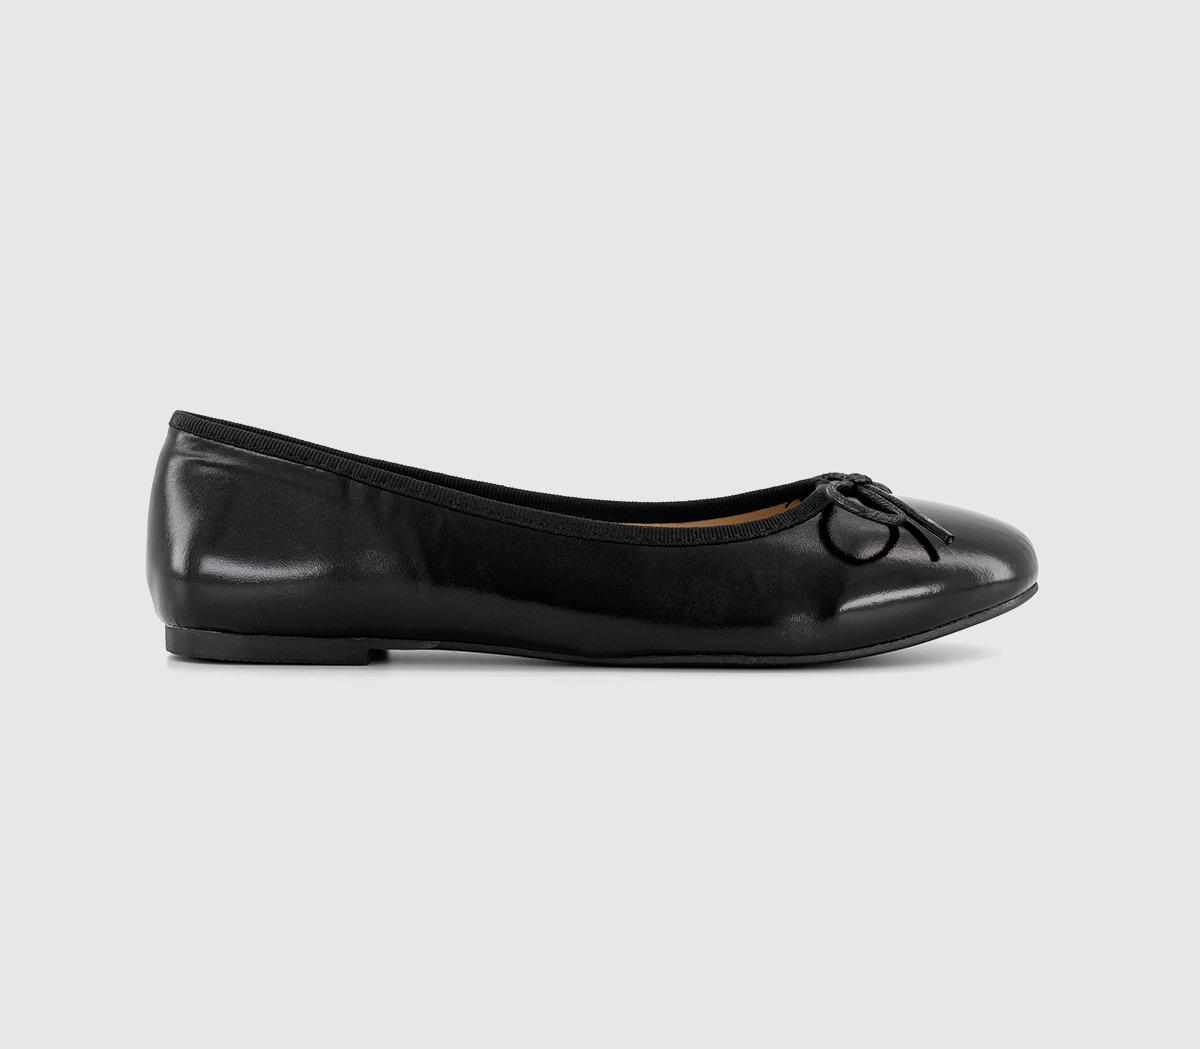 French SoleAmelie Ballet ShoesBlack Leather